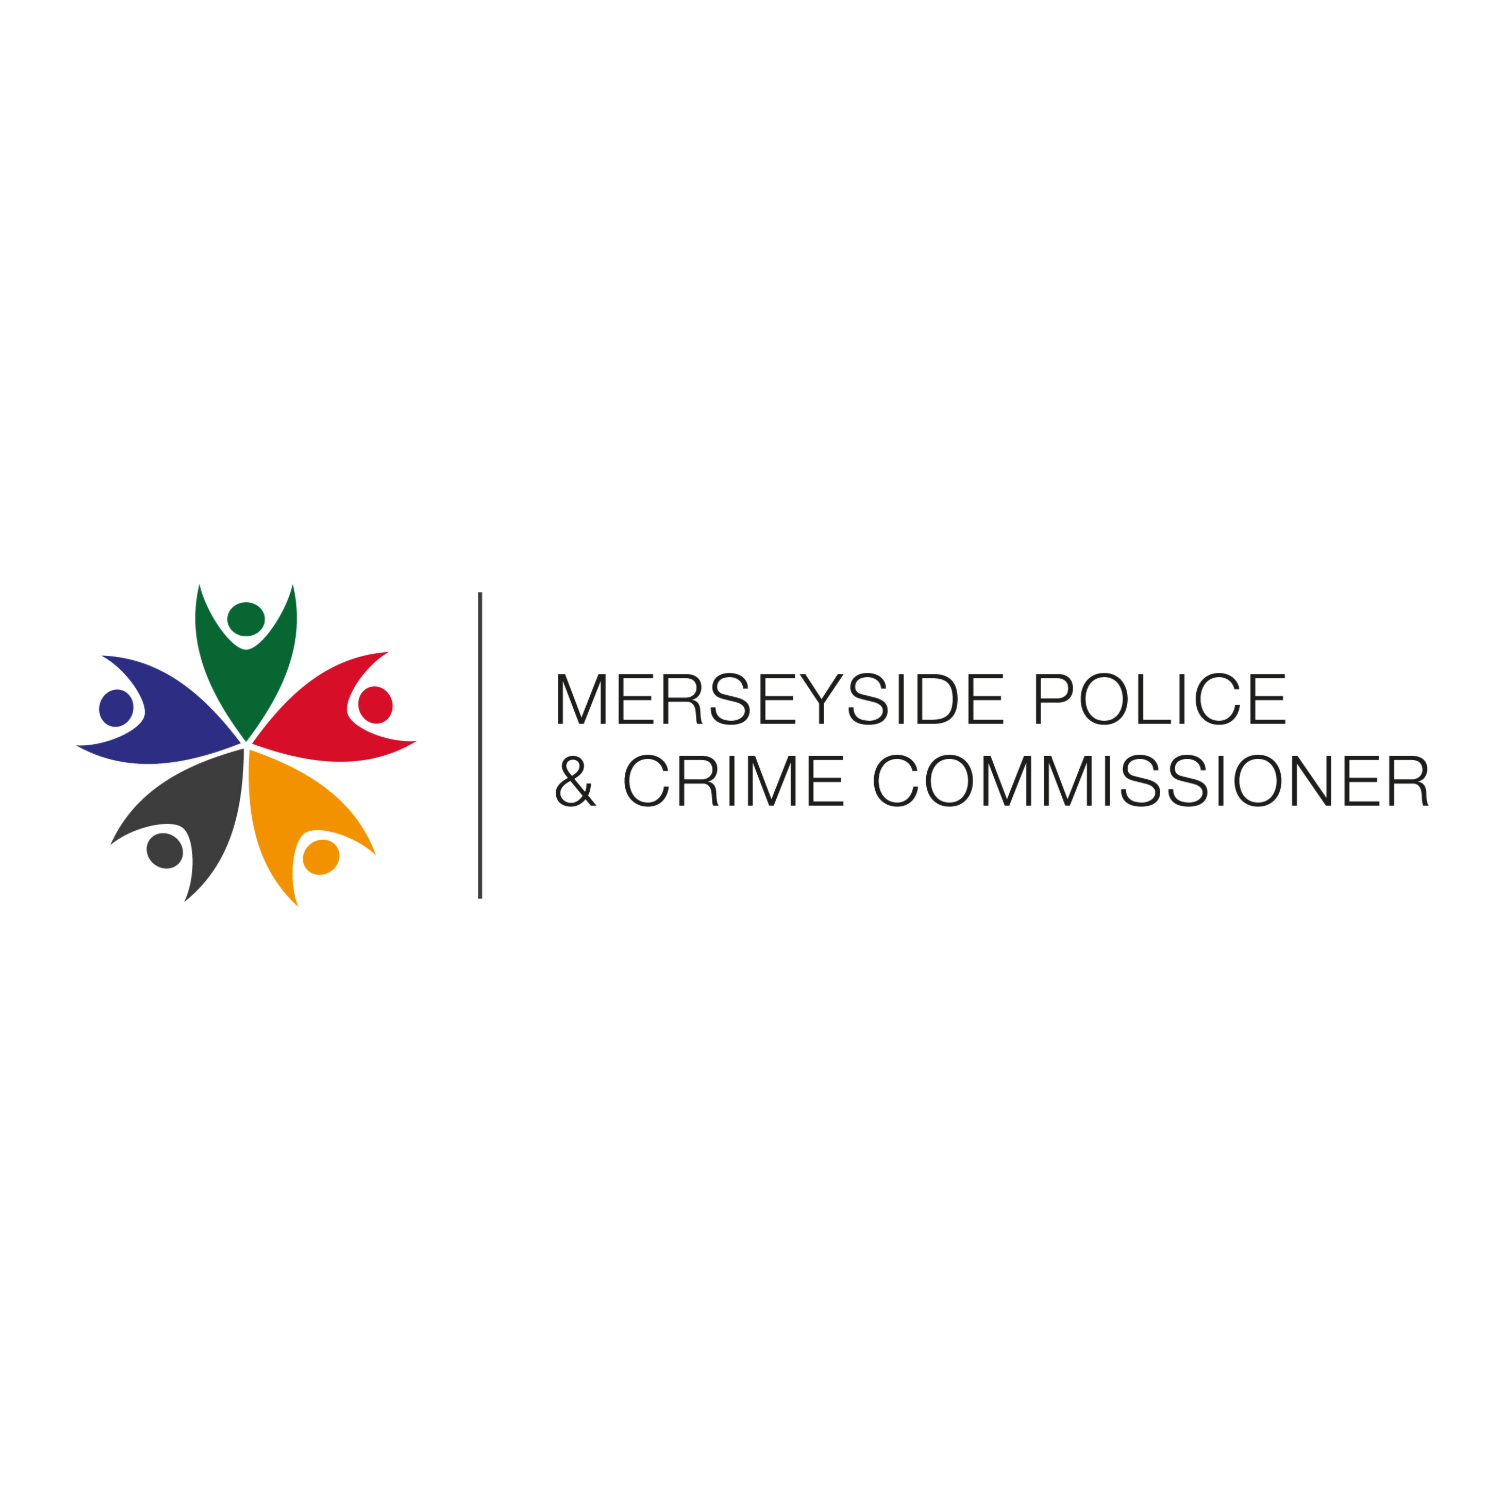 Office of the Police and Crime Commissioner for Merseyside